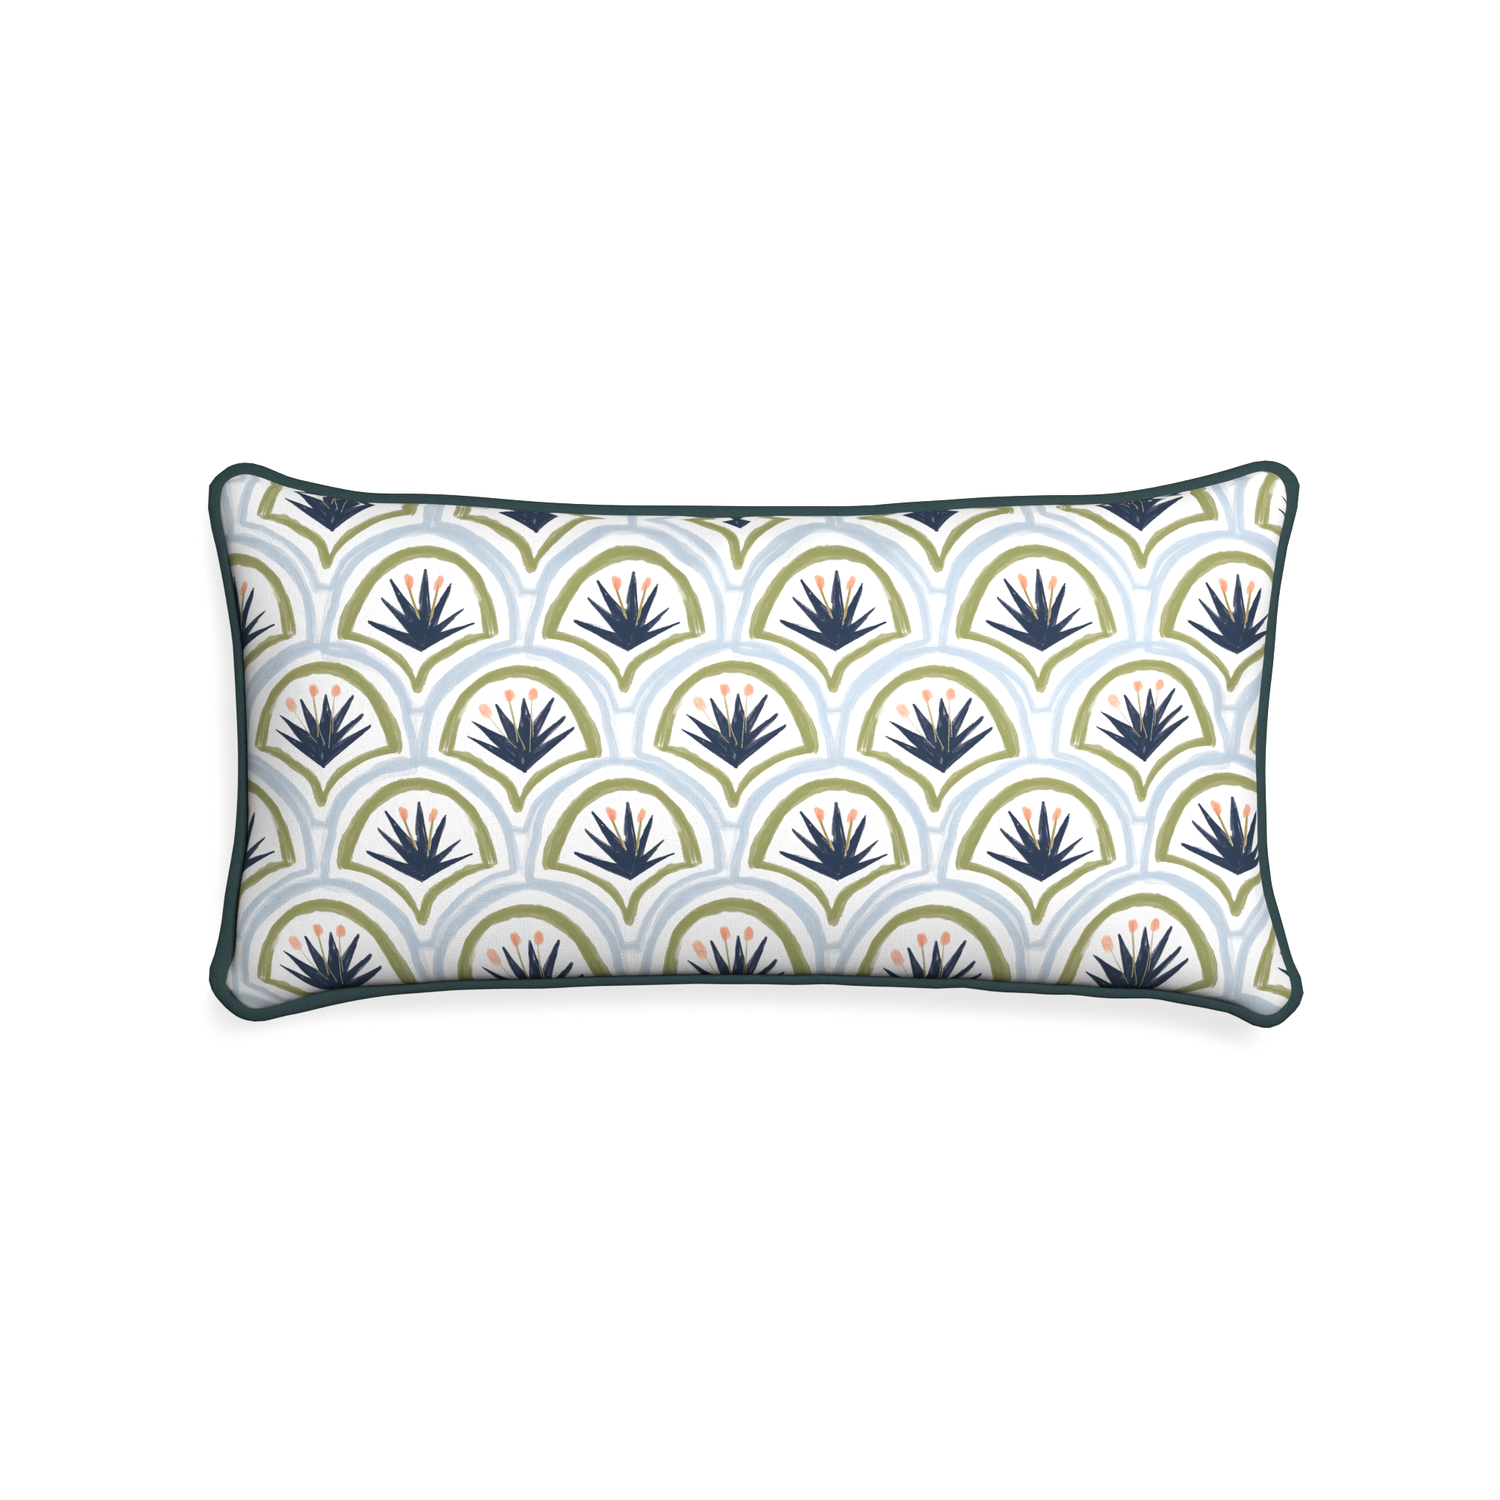 Midi-lumbar thatcher midnight custom art deco palm patternpillow with p piping on white background